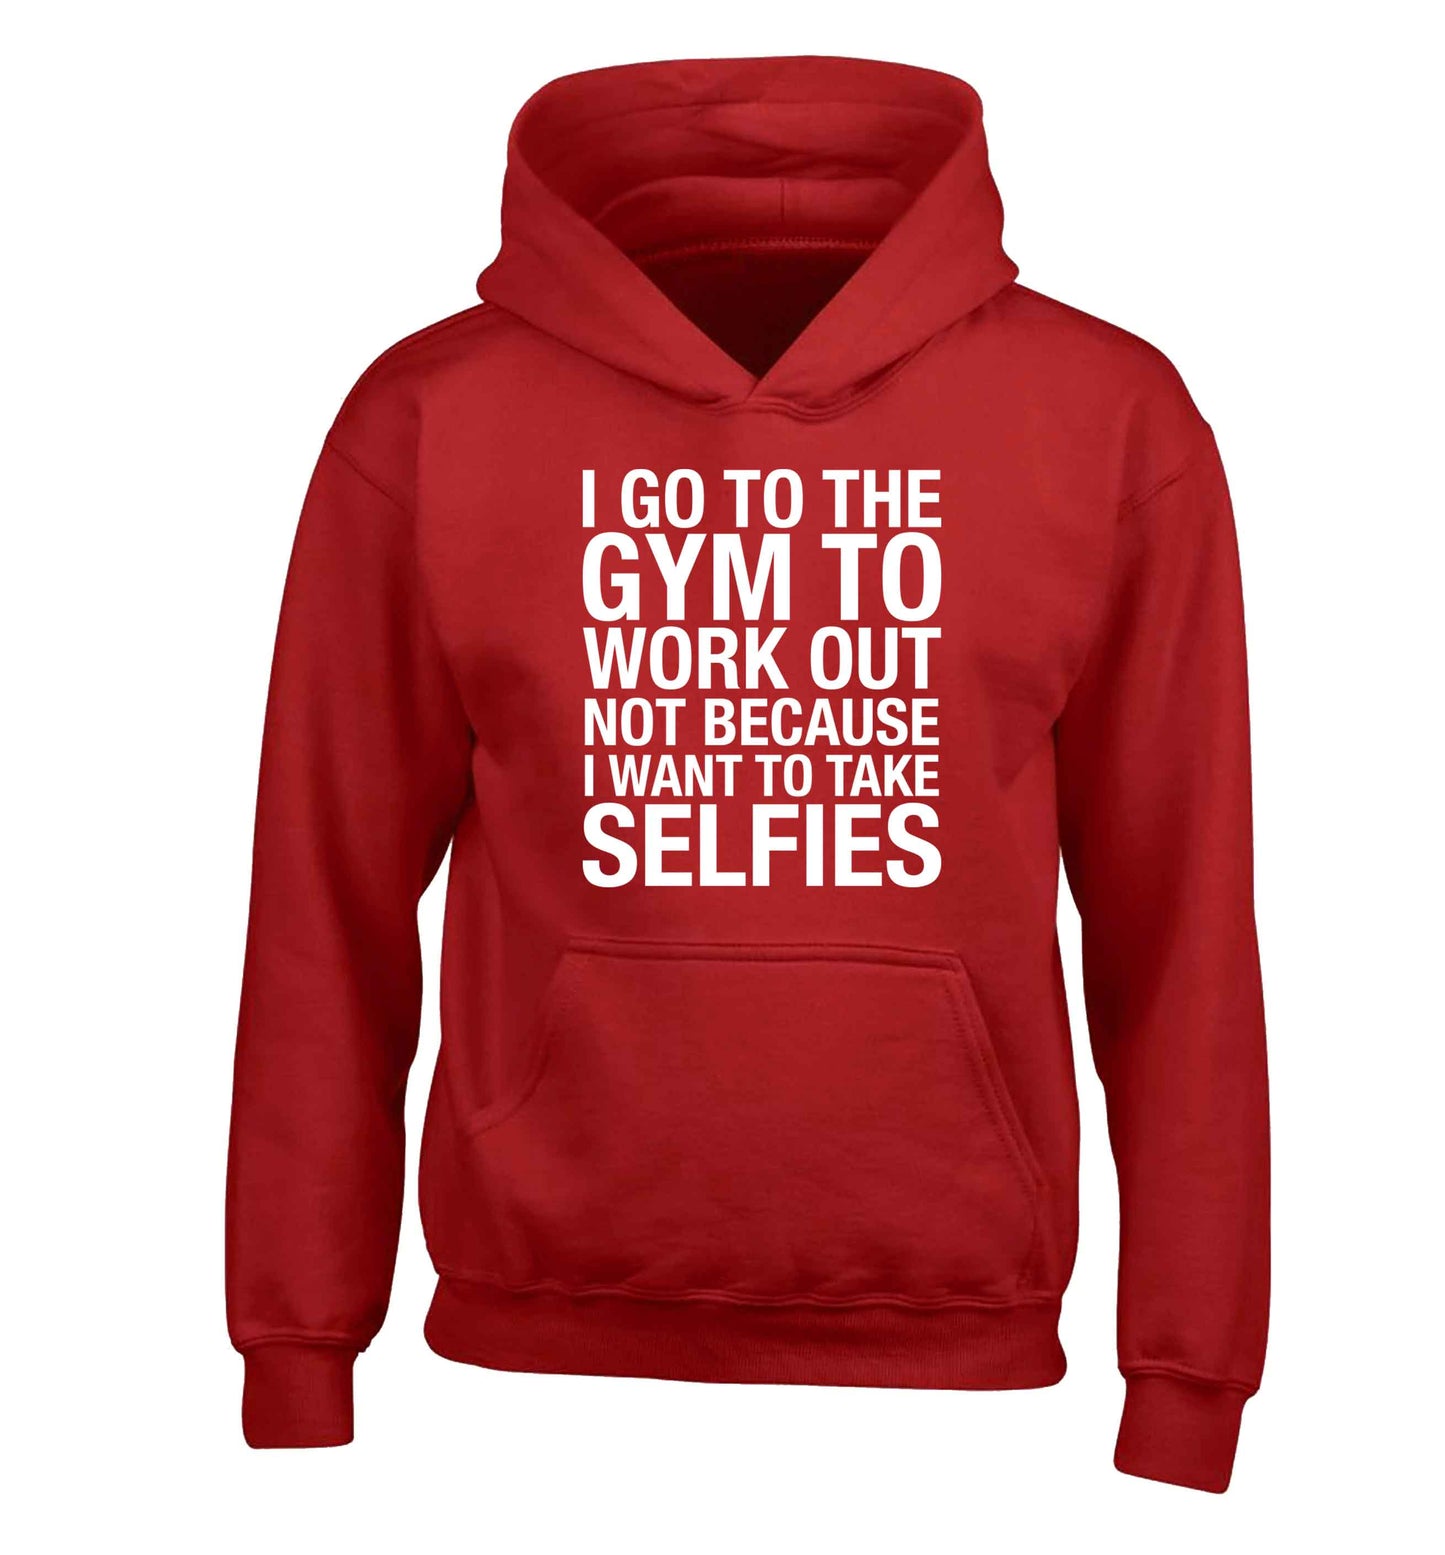 I go to the gym to workout not to take selfies children's red hoodie 12-13 Years